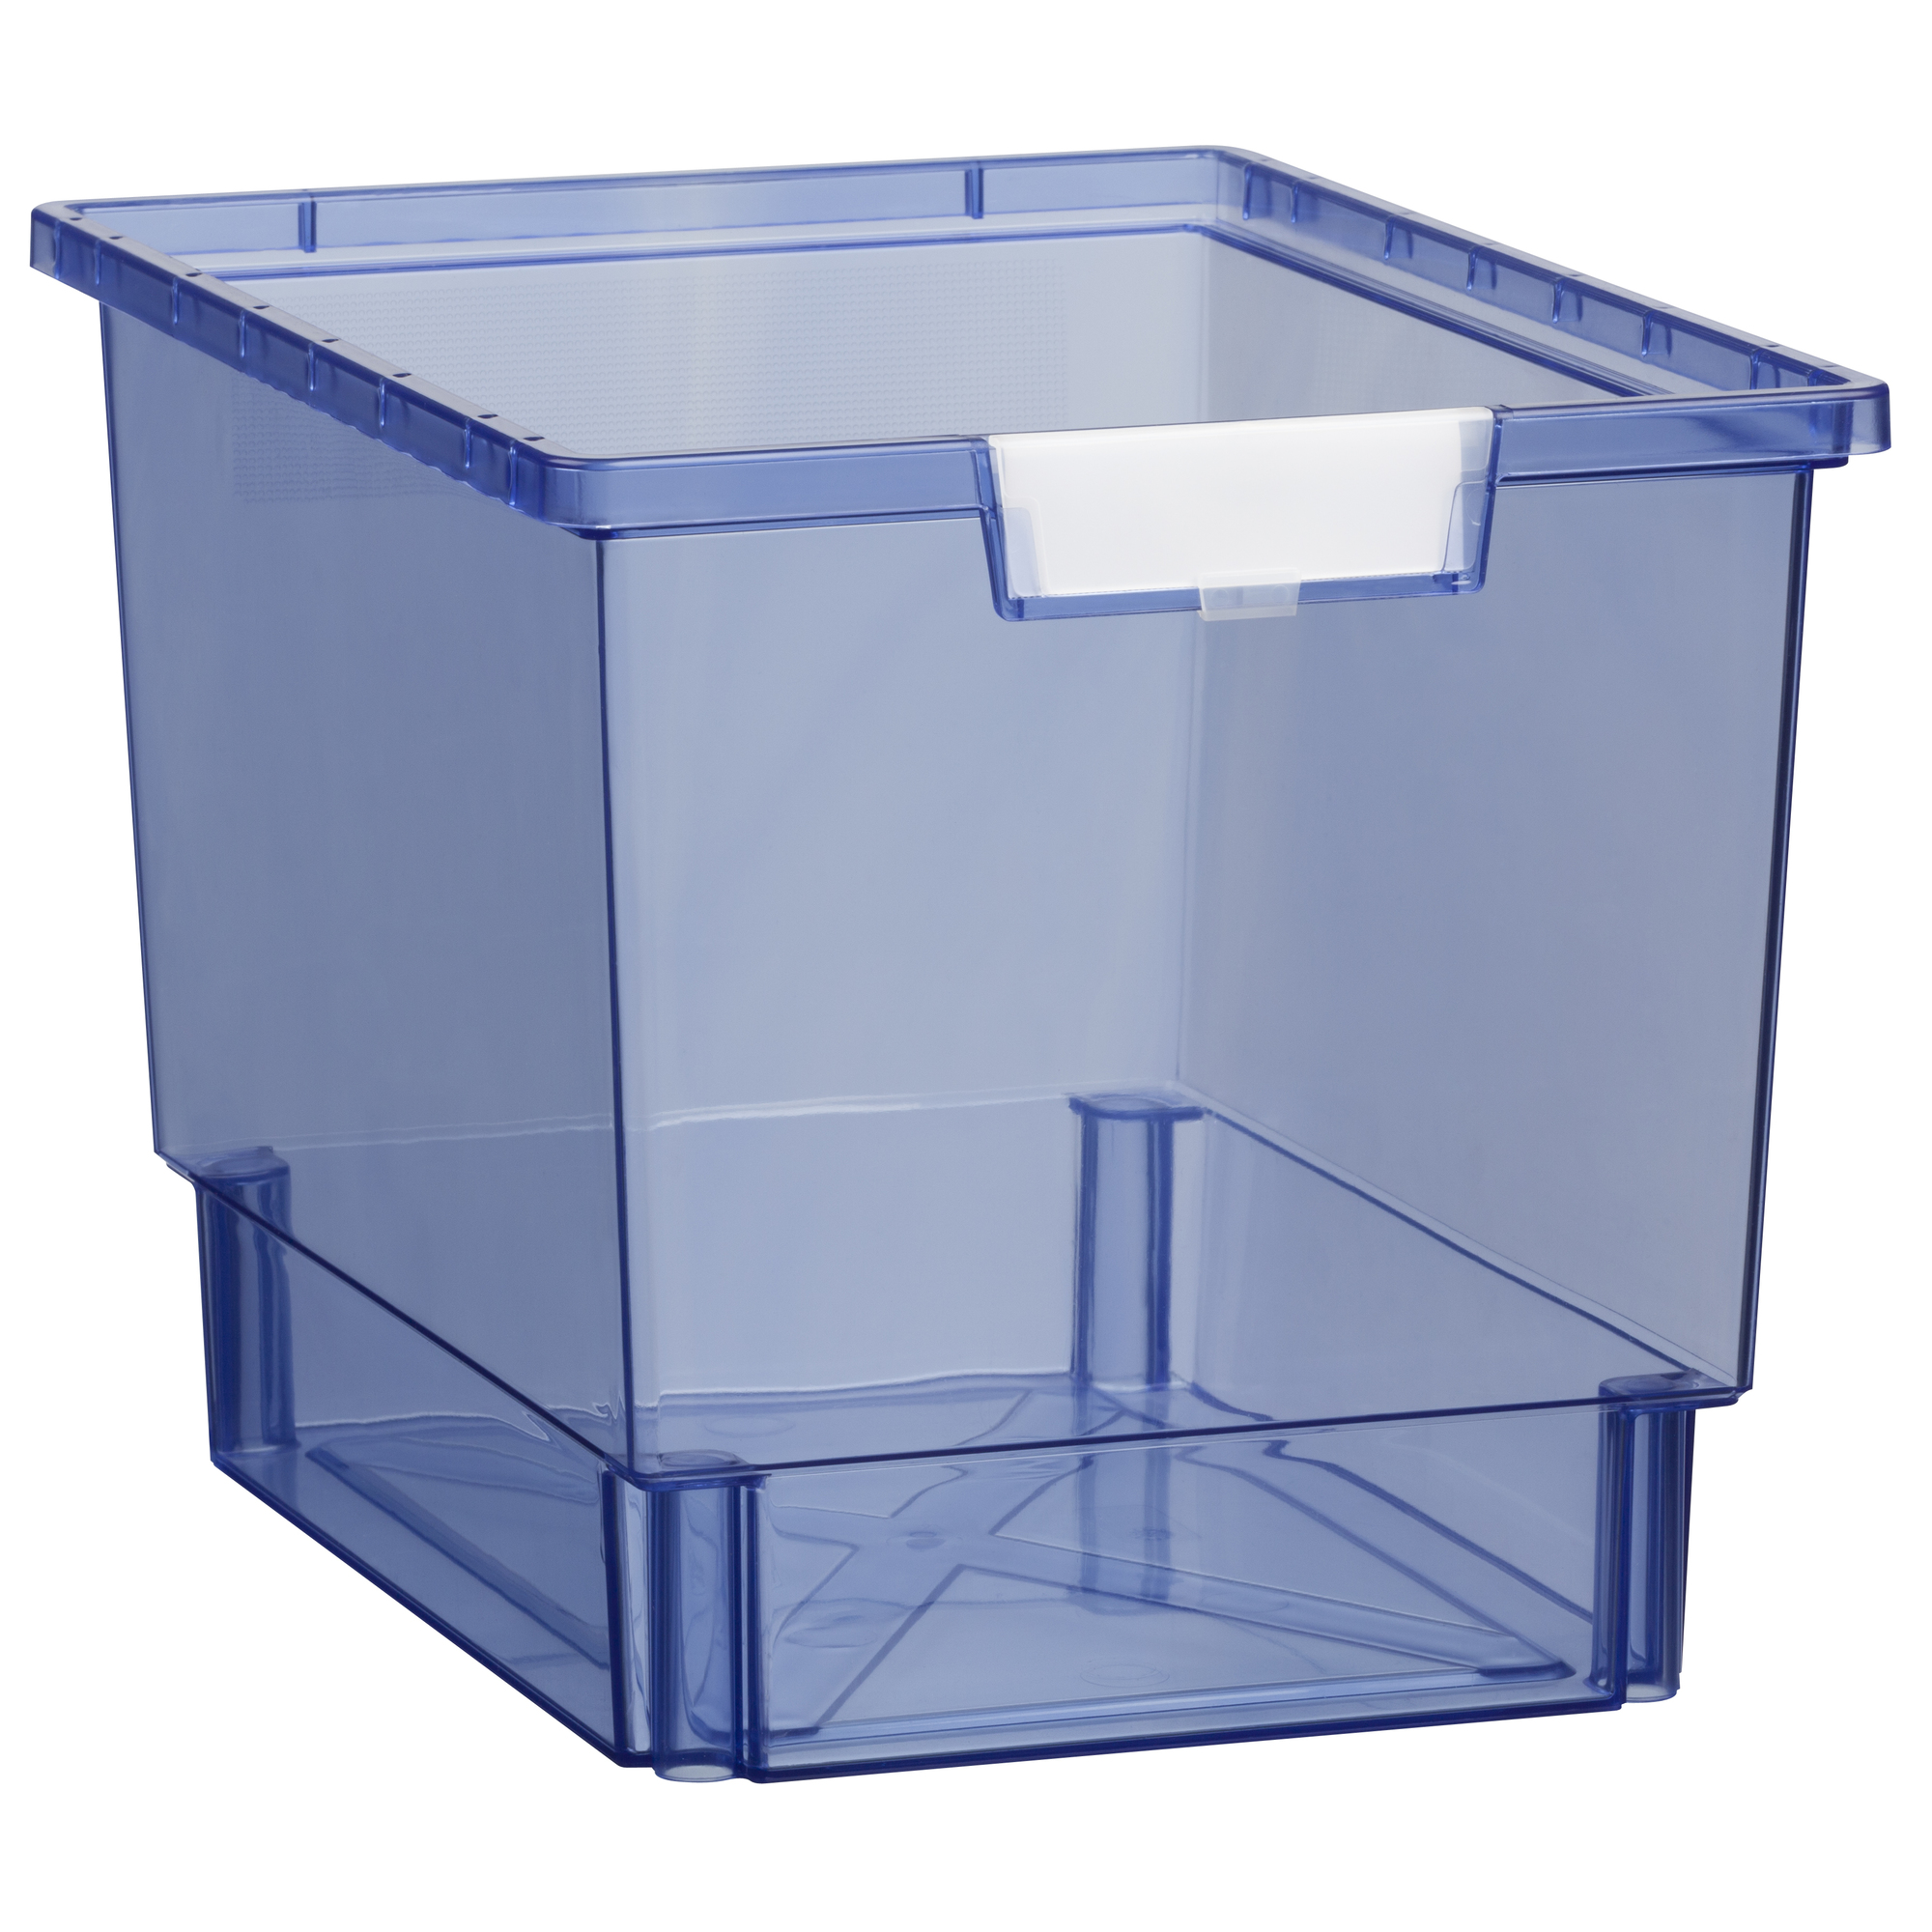 Certwood StorWerks, Slim Line 12Inch Tray in Tinted Blue - 3 Pack, Included (qty.) 3, Material Plastic, Height 12 in, Model CE1954TB3